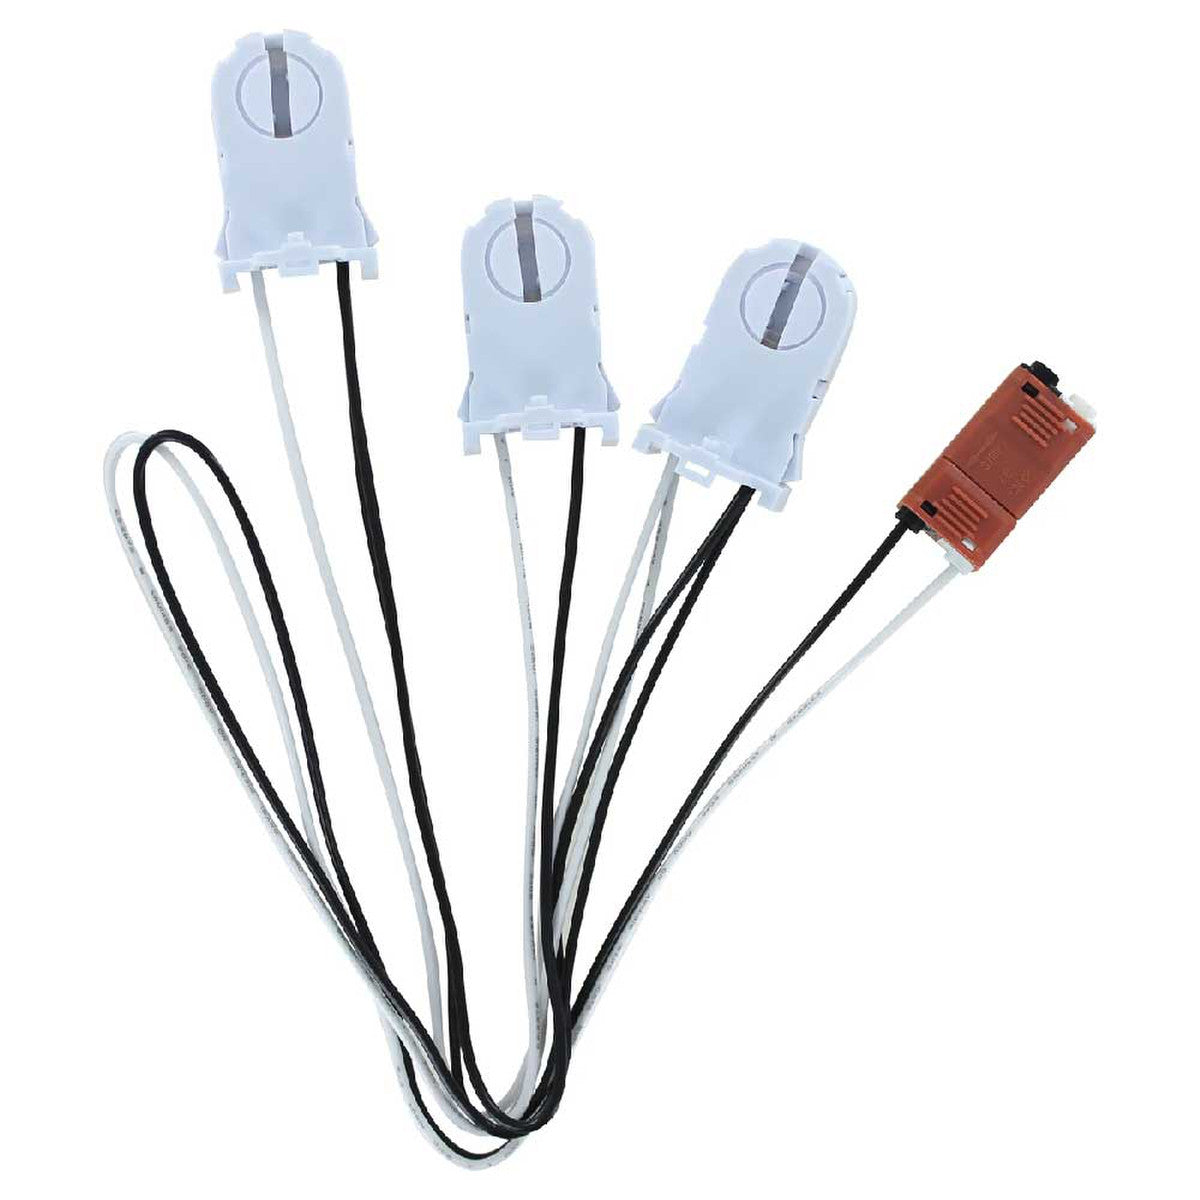 3-Lamp Wiring Harness with Tall Non-shunted Sockets for LED Tubes